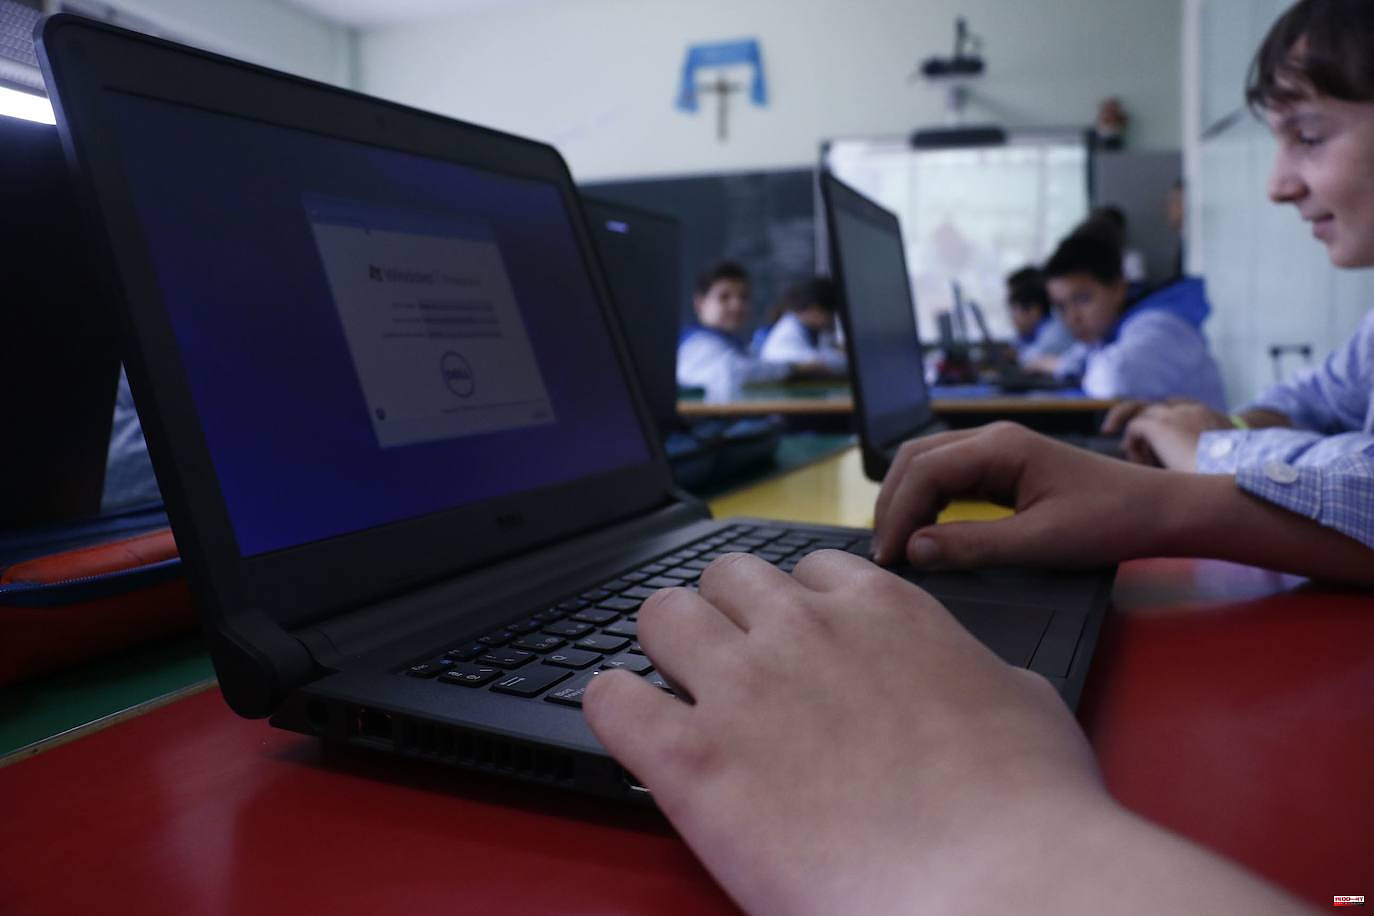 Education will carry out a pilot project to develop a free software digital platform in schools in the Basque Country